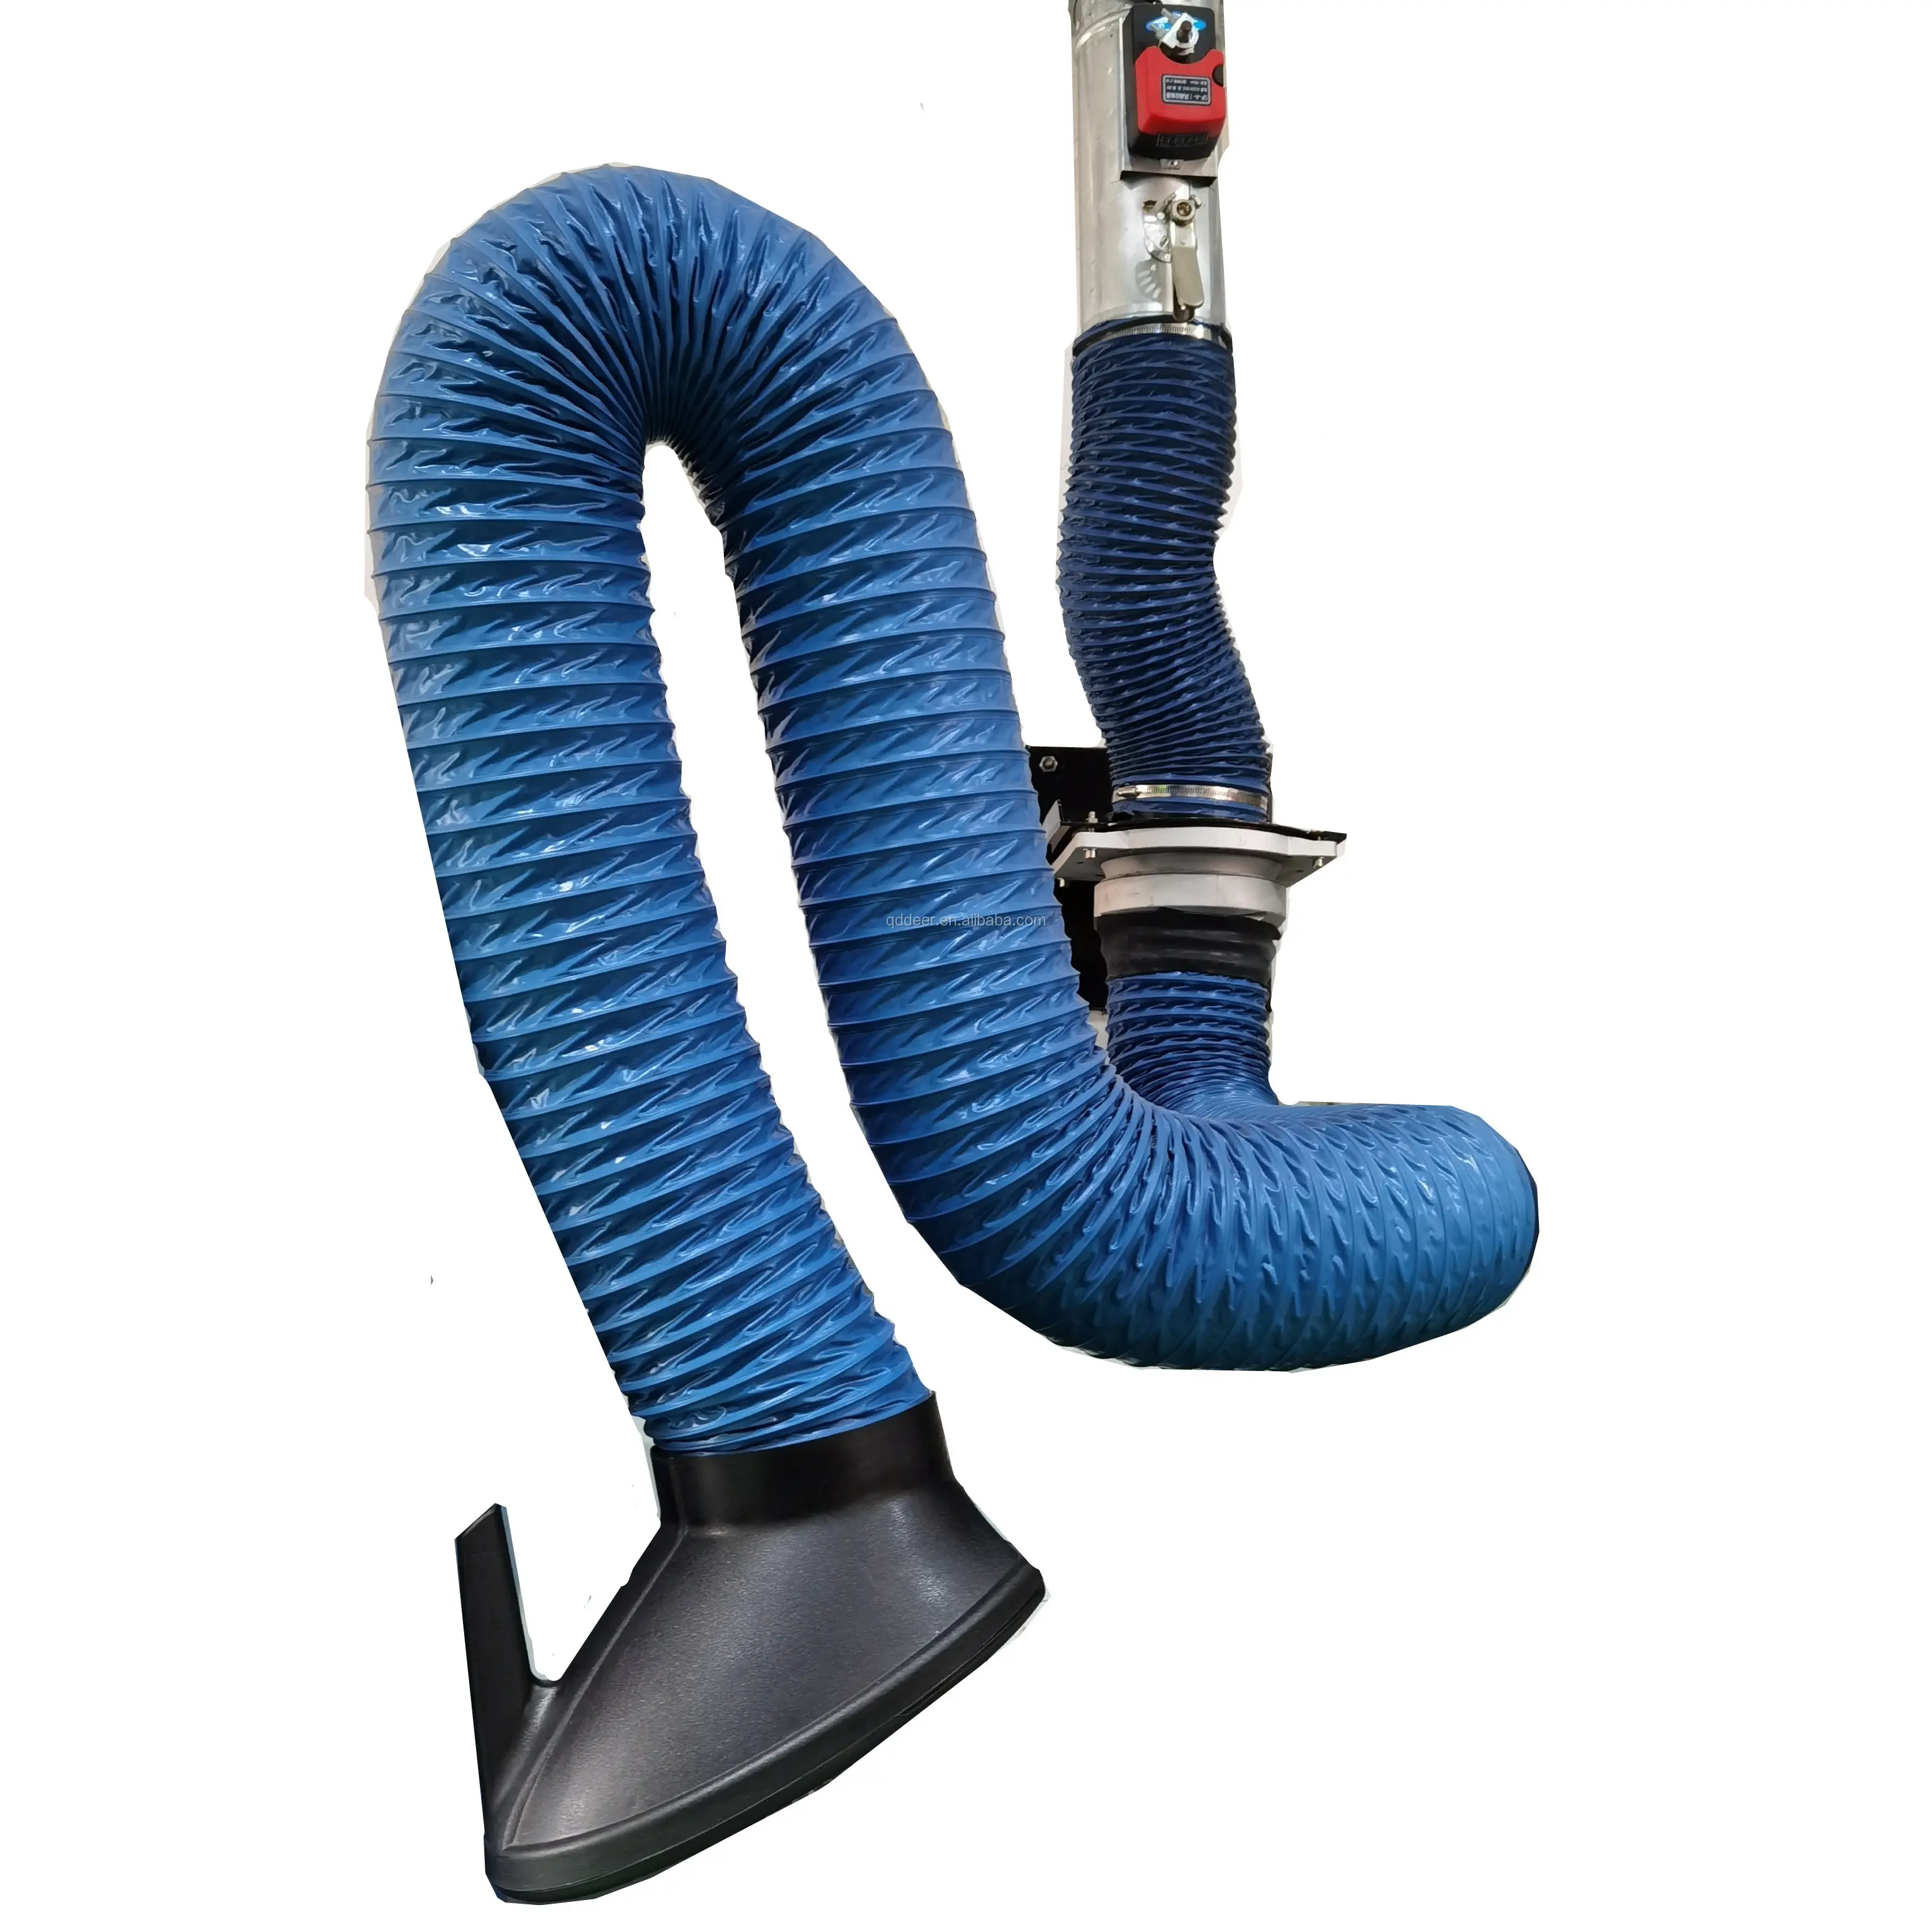 Industry use PVC air ventilation hose/ventilating air duct